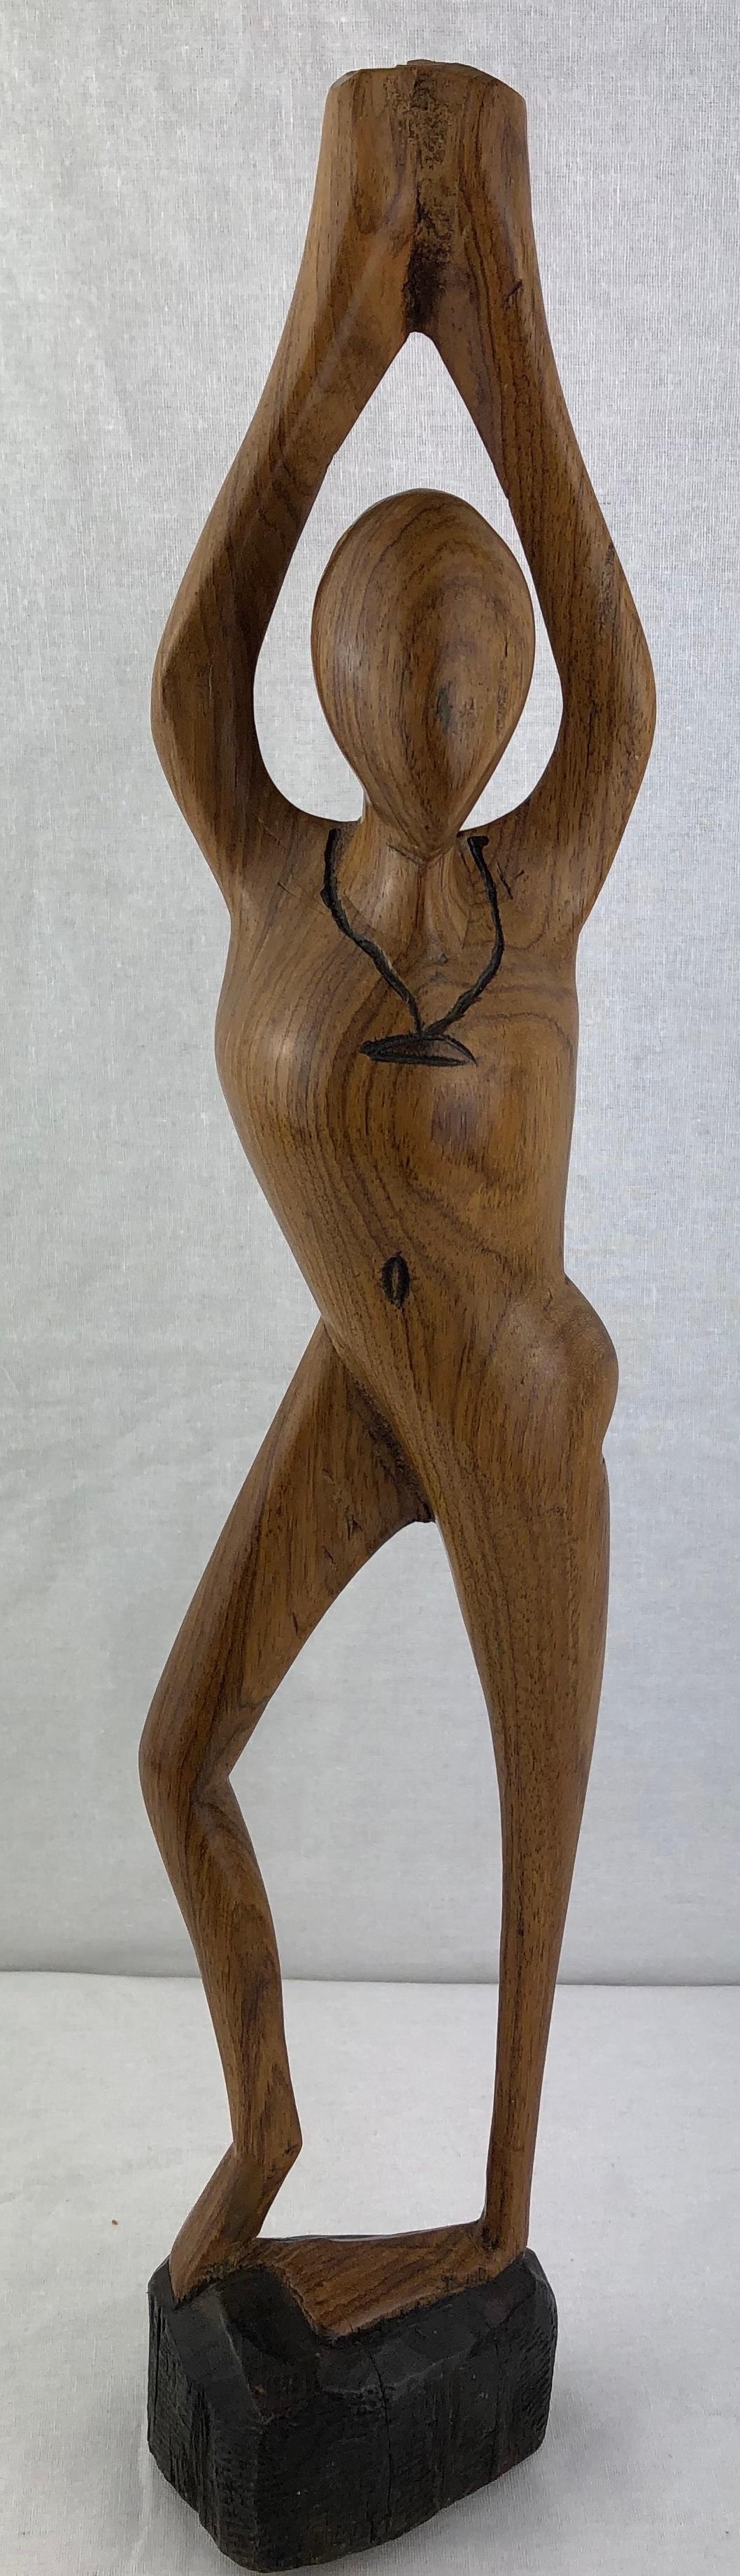 Hand-Carved Mid-Century Modern Yoga Pose Form Sculpture For Sale